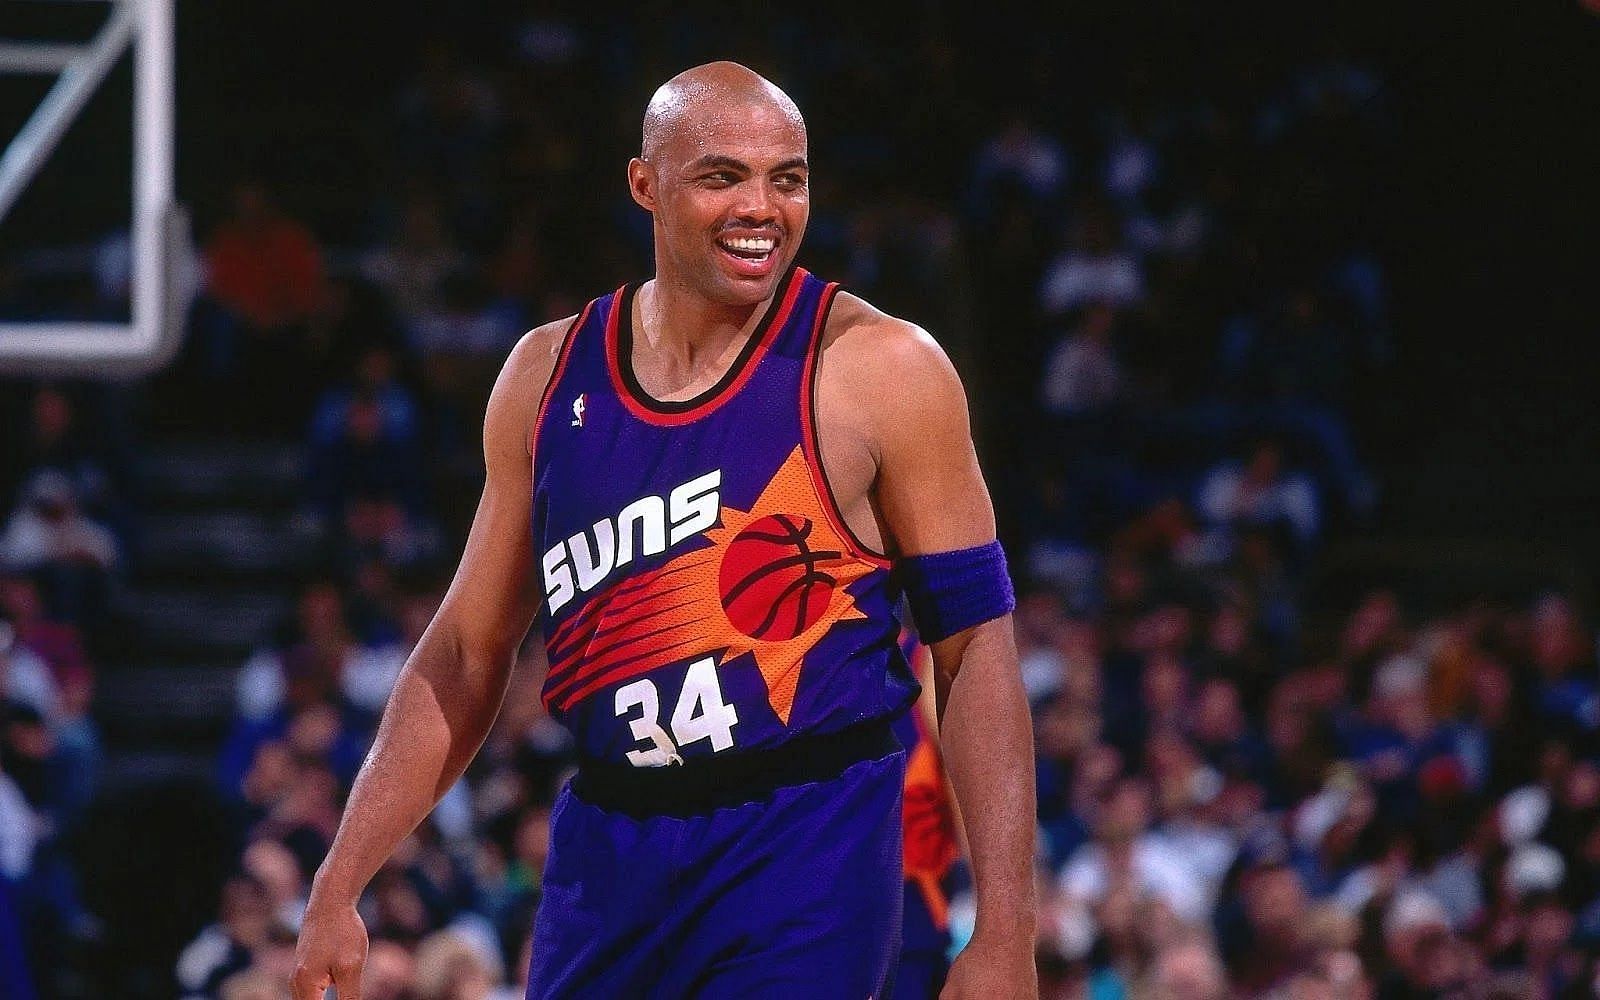 Charles Barkley was the 1993 NBA MVP while playing for the Phoenix Suns.